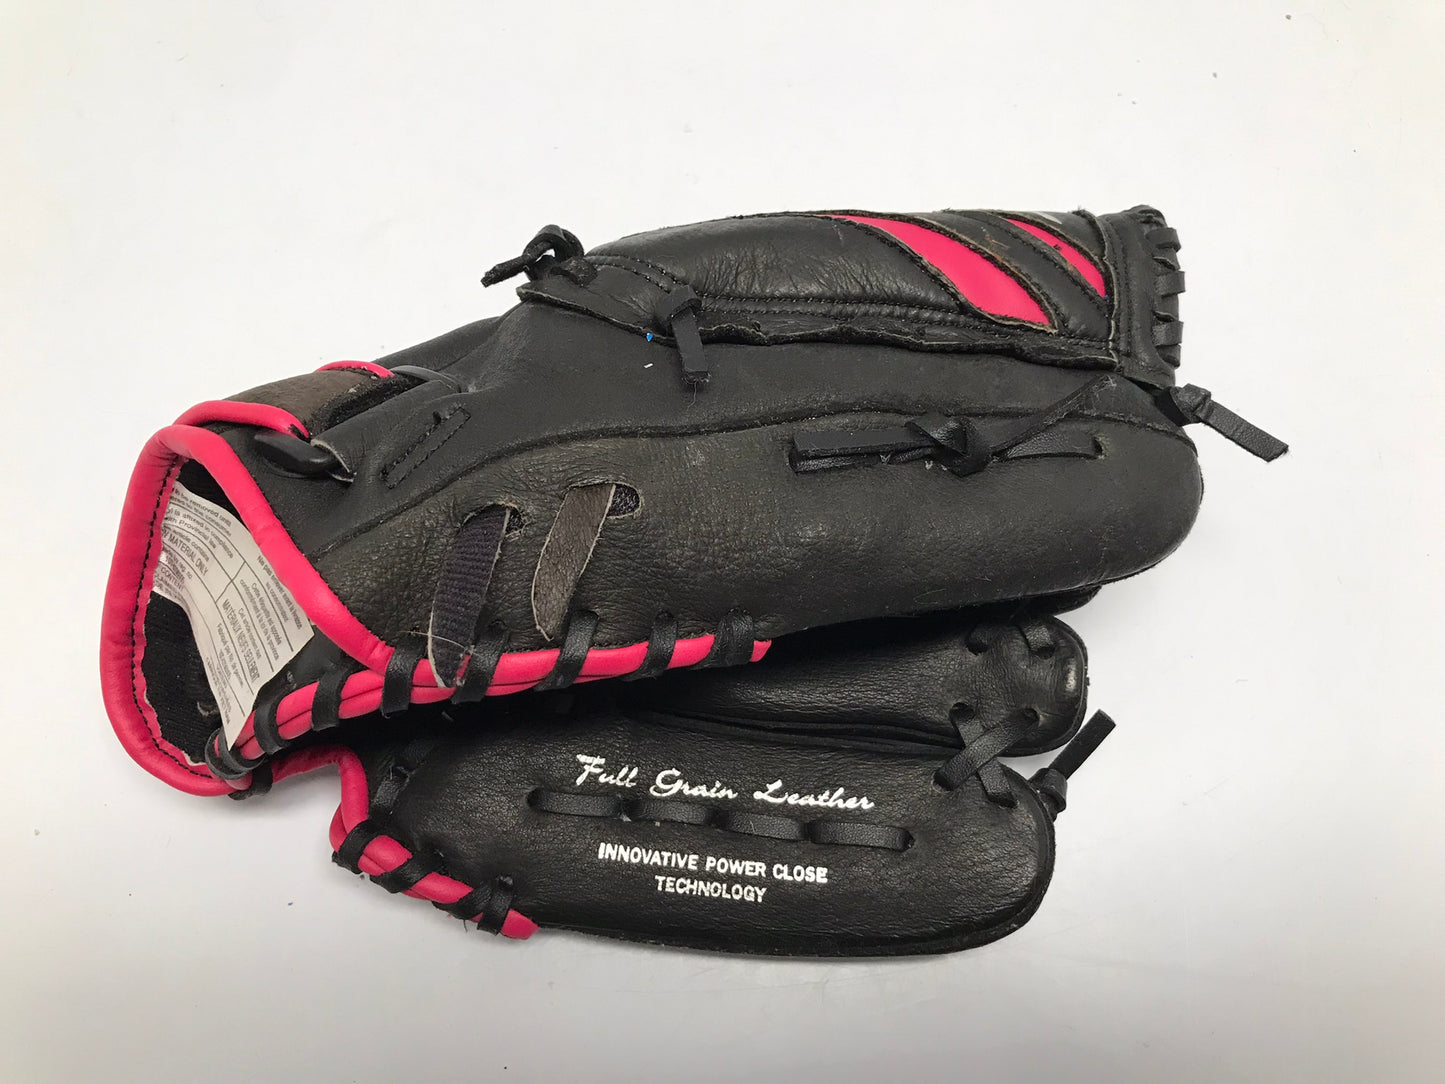 Baseball Glove Child Youth Size 11.5 Mizuno Black Pink Leather Fits On Left Hand Excellent